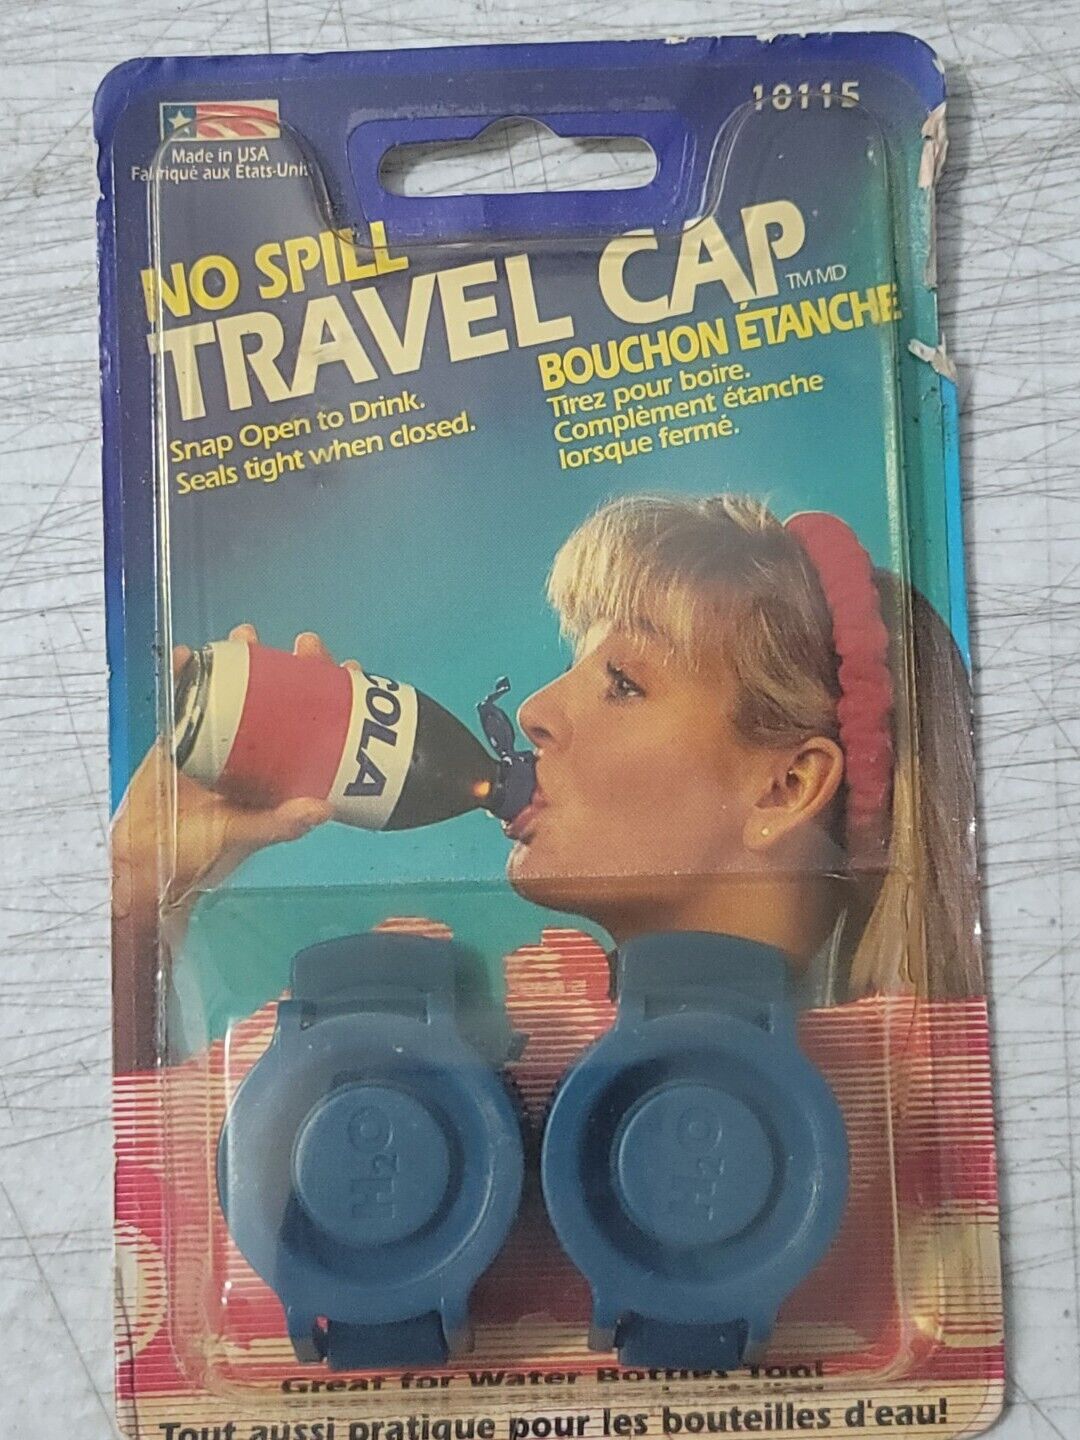 Vintage NOS 1994 Flotool No Spill Travel Cap For Drinks 10115 Made in USA